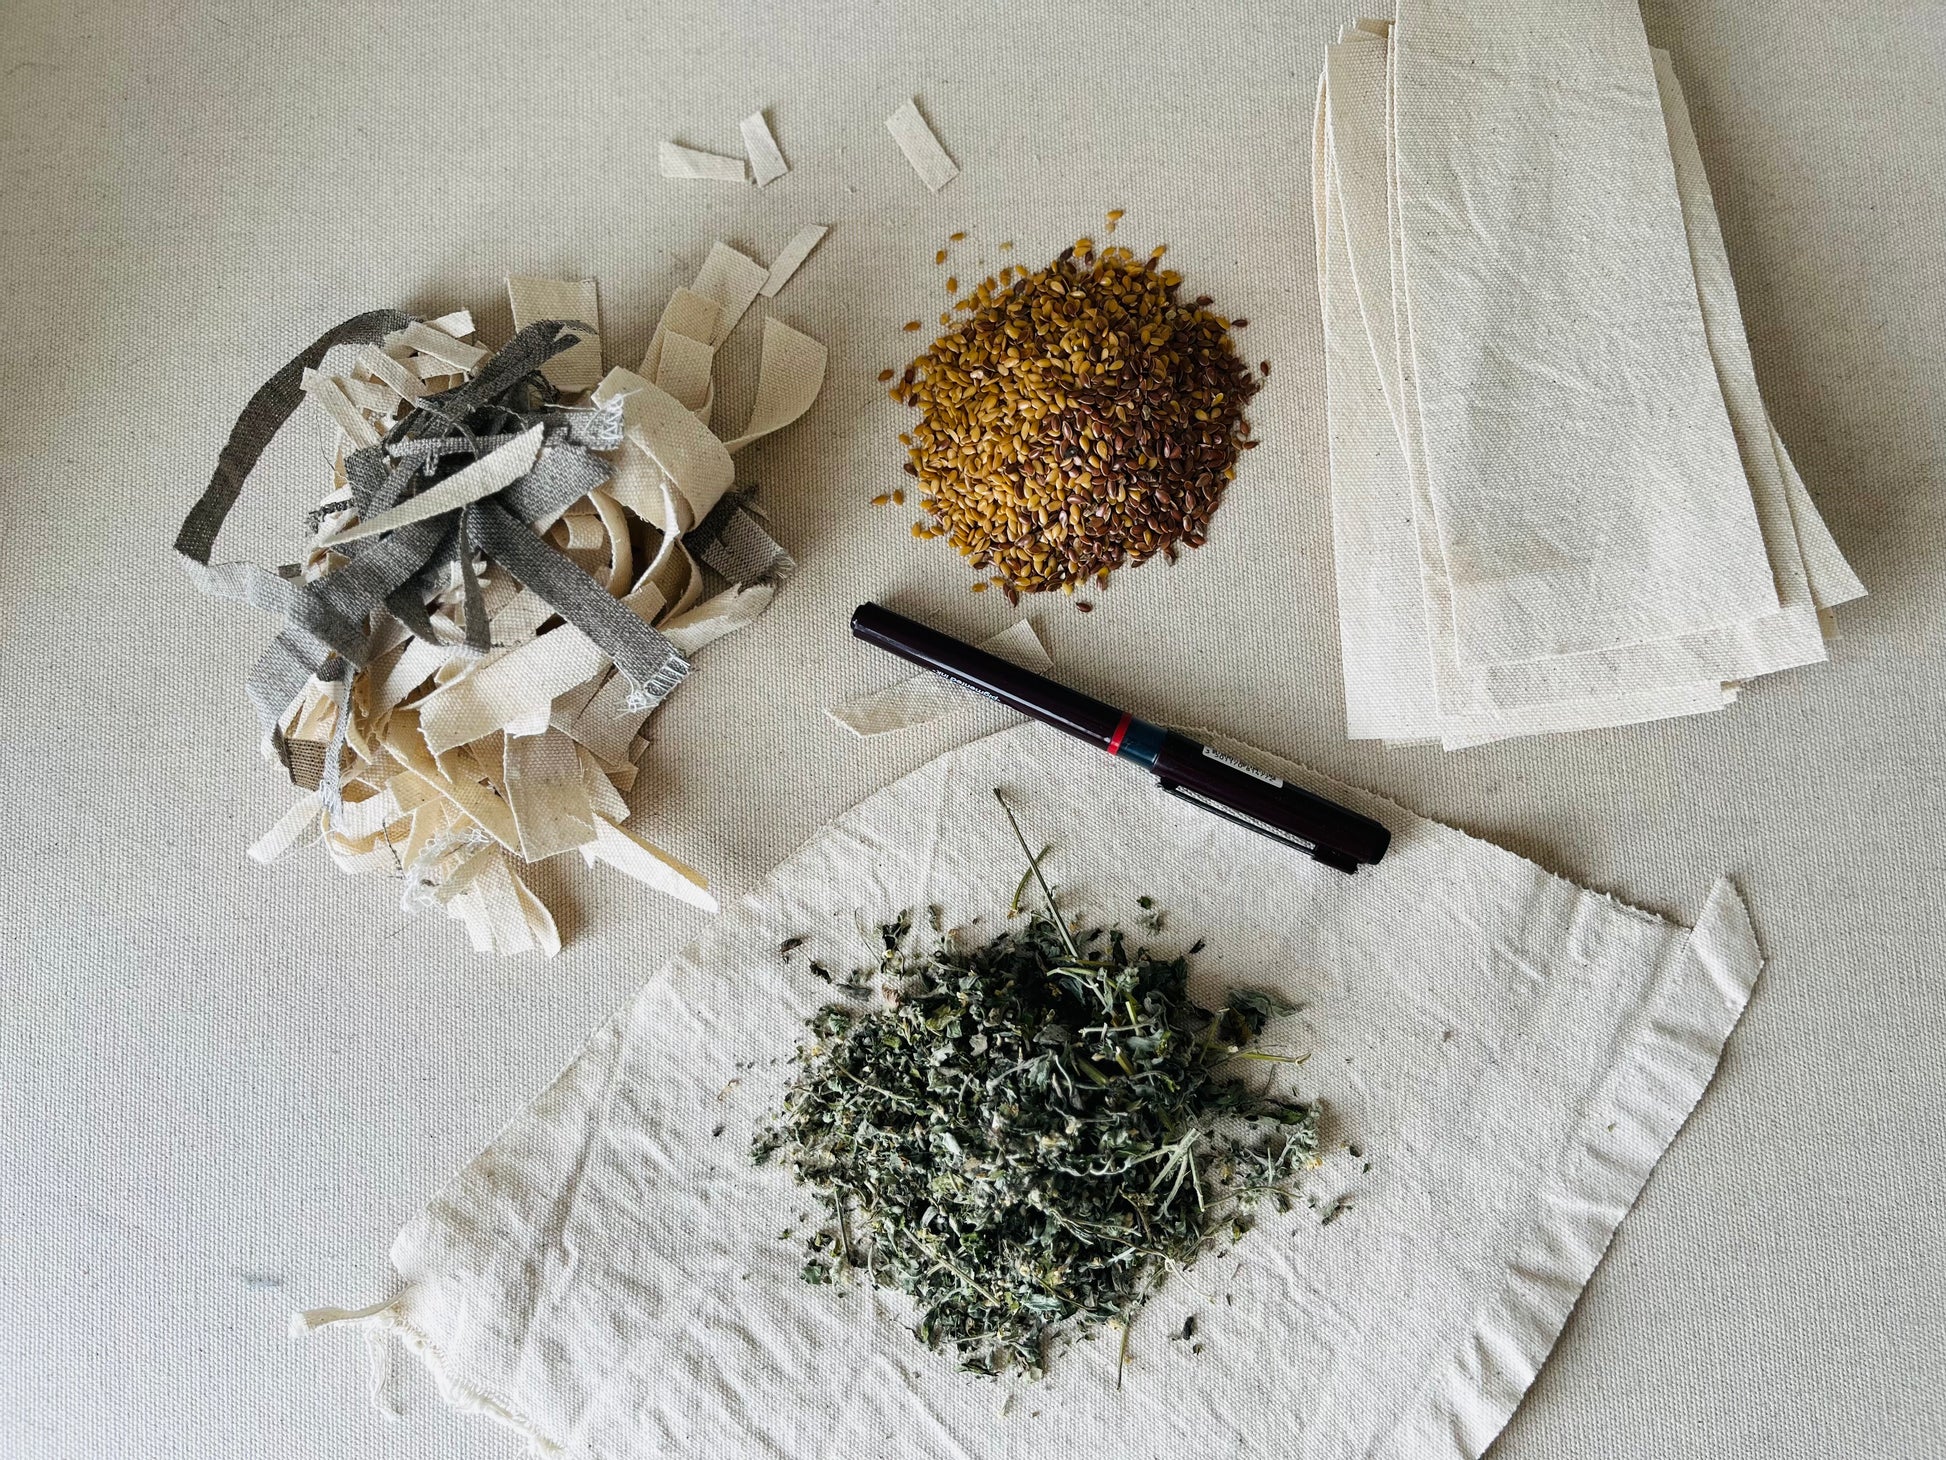 The components of the cat toy are shown: a small mound each of all-natural fabric scraps , flax seed, catnip and some strips of cotton canvas ready for sewing.